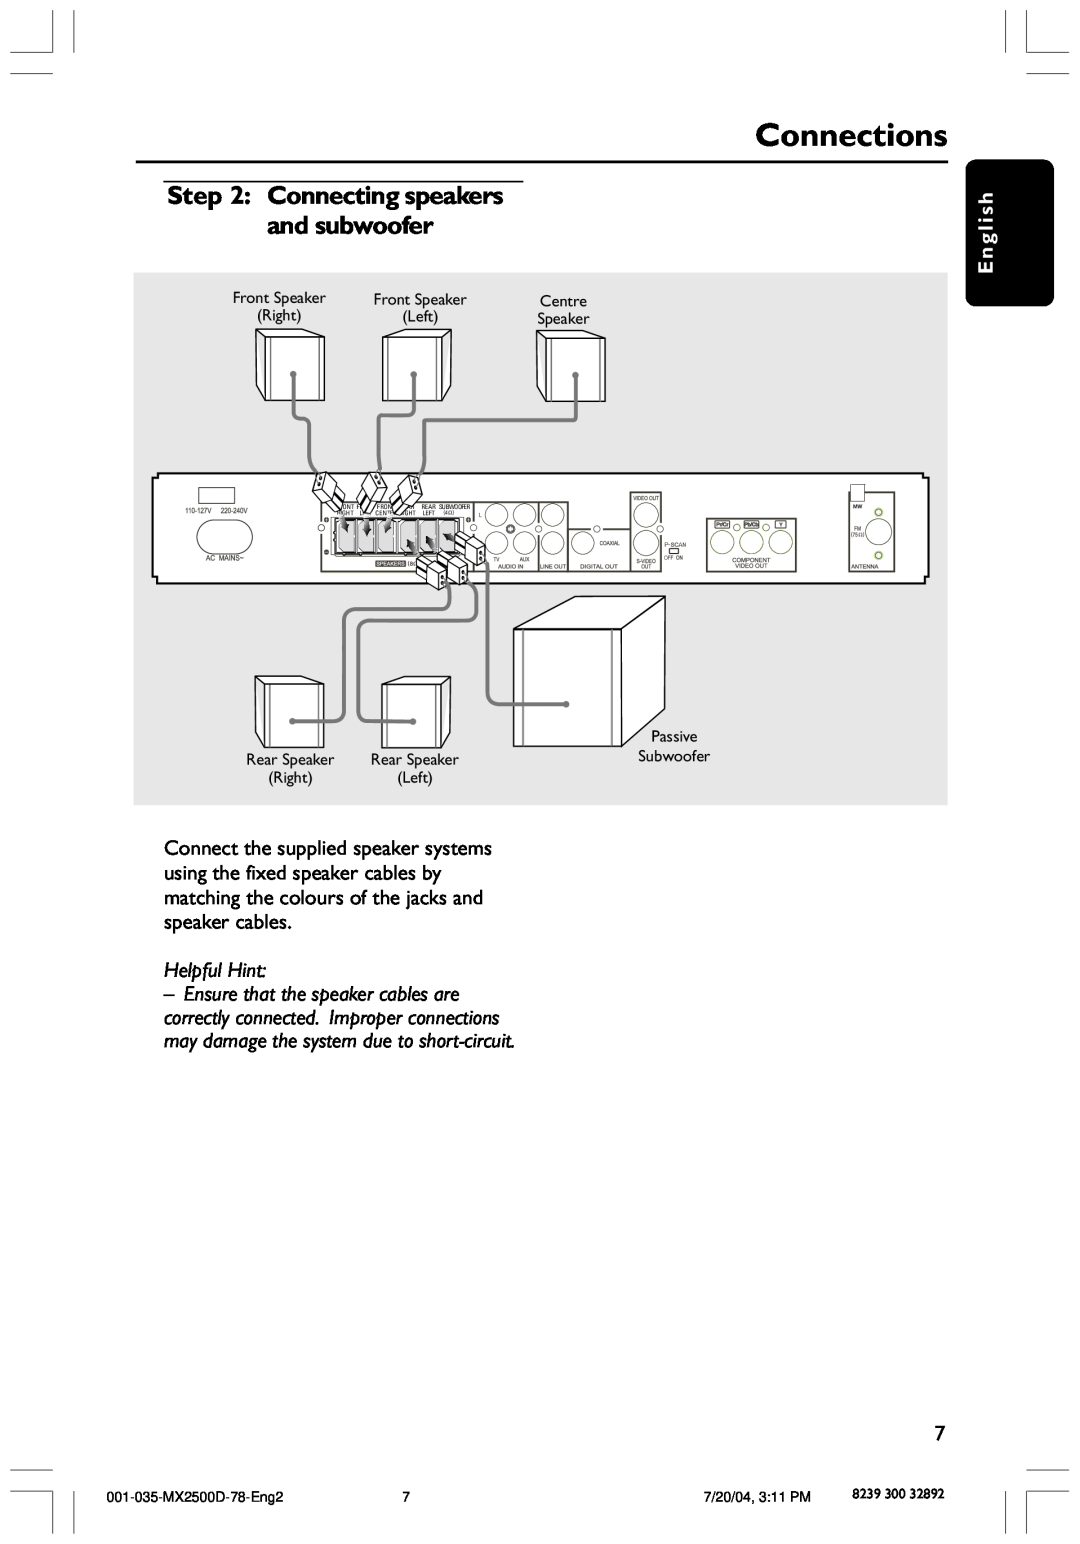 Philips 78, MX2500D user manual Connections, Connecting speakers and subwoofer, English, Helpful Hint 